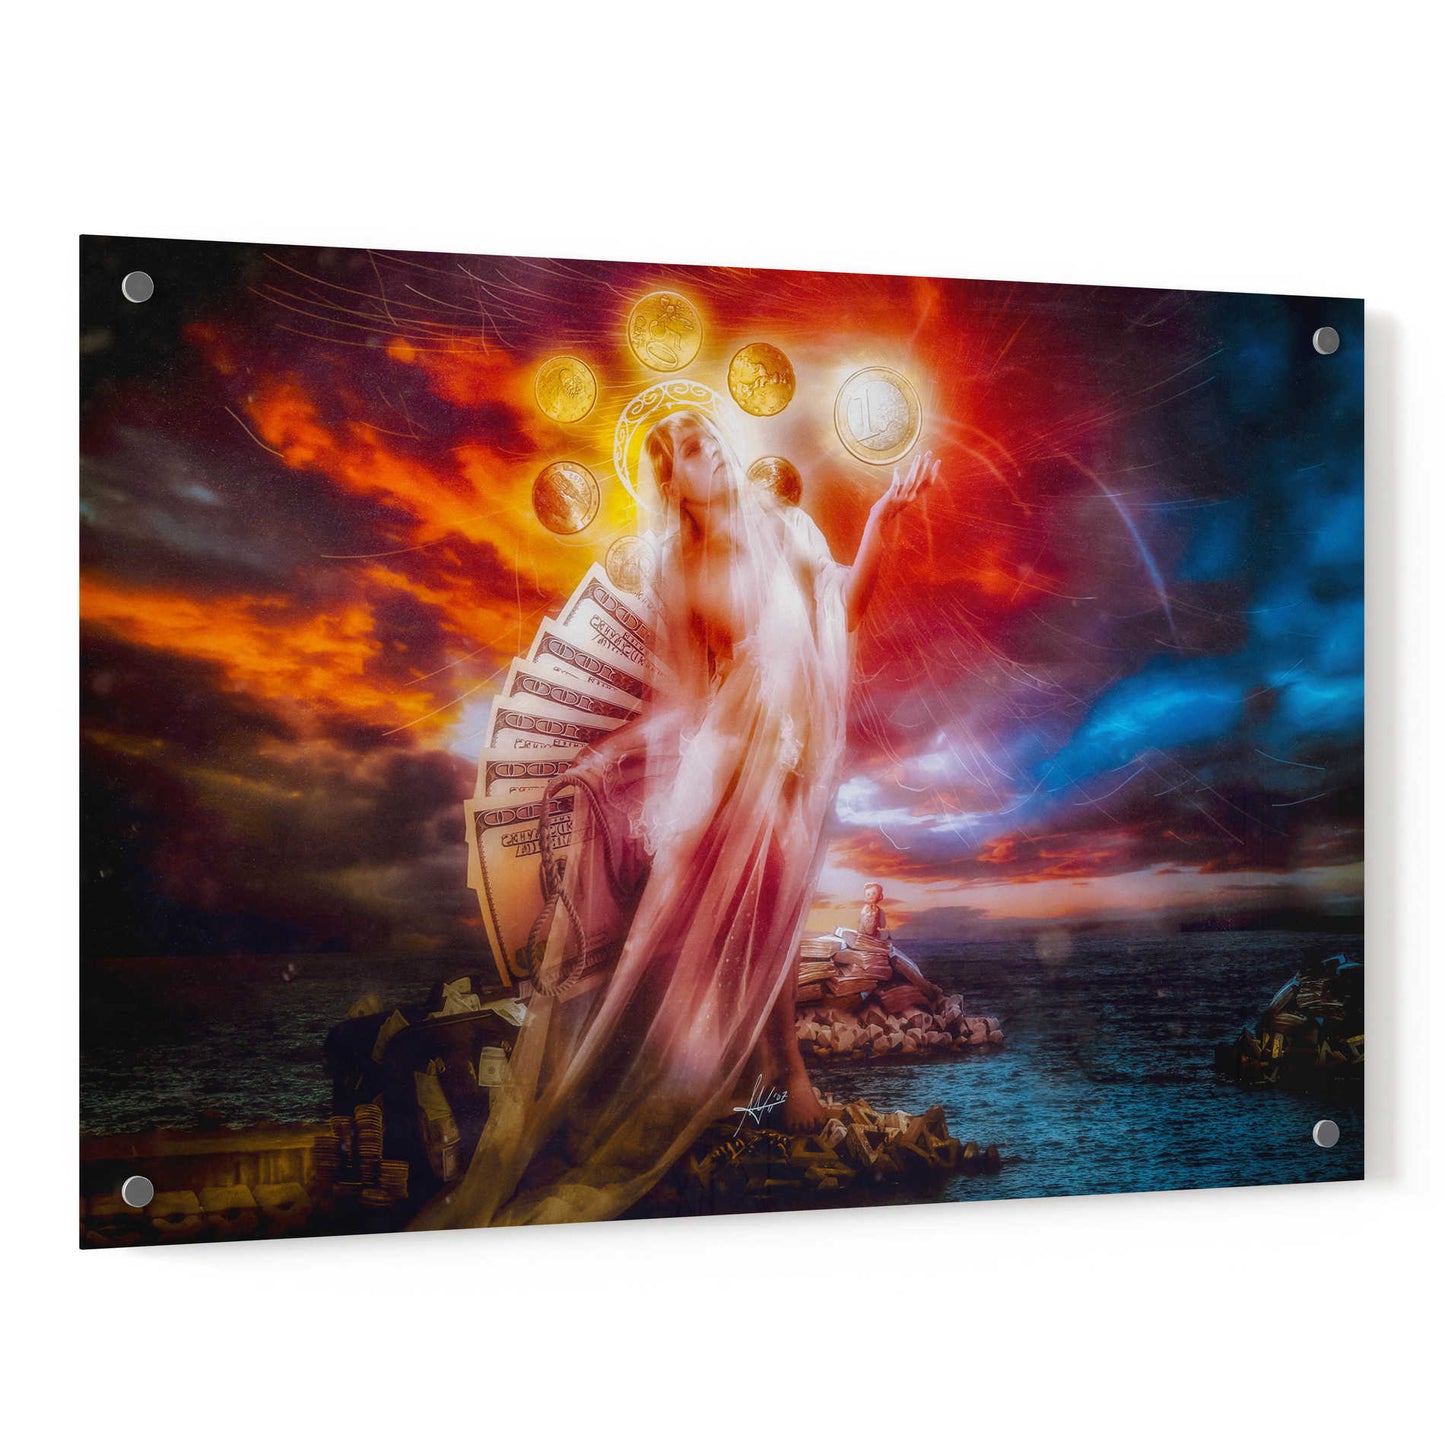 Epic Art 'St. Mary of Coins' by Mario Sanchez Nevado, Acrylic Glass Wall Art,24x36